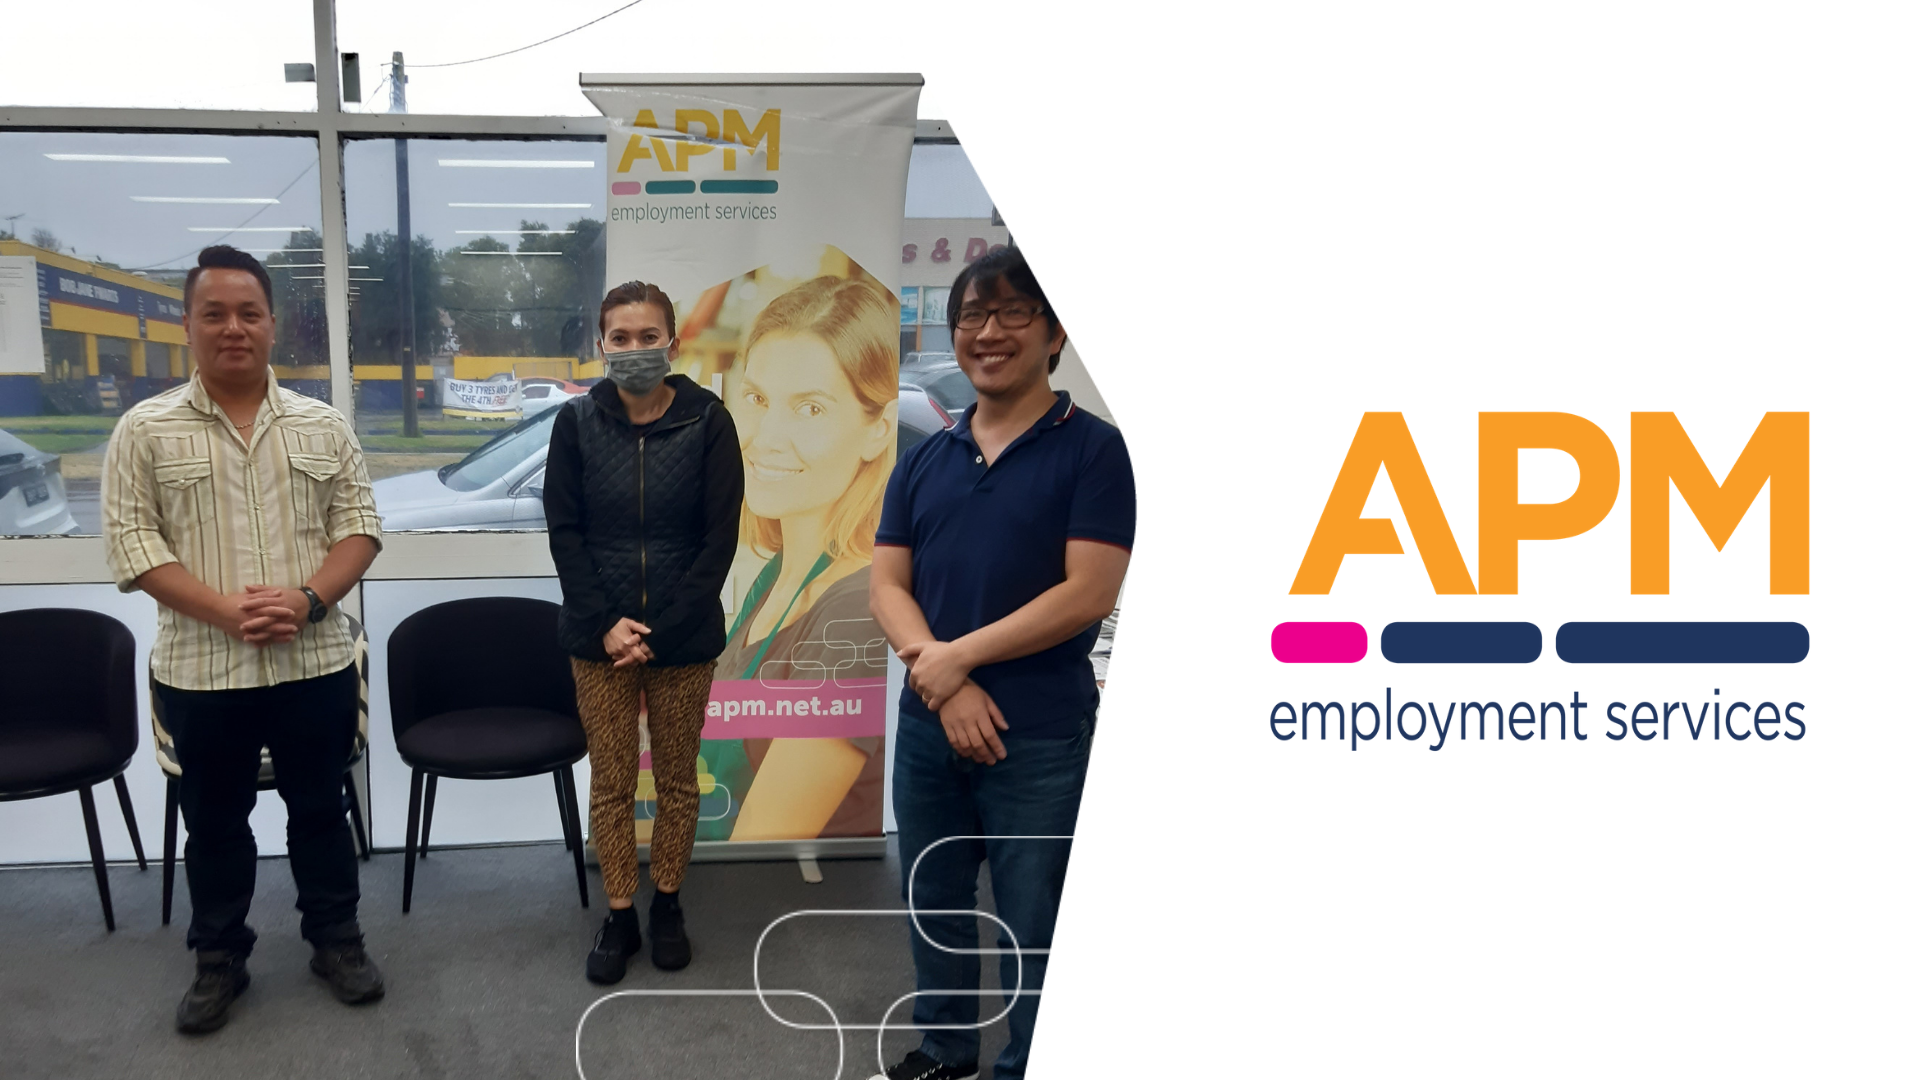 Alex, Thi and Ngoc are pictured standing a safe social distance apart in the APM Springvale office